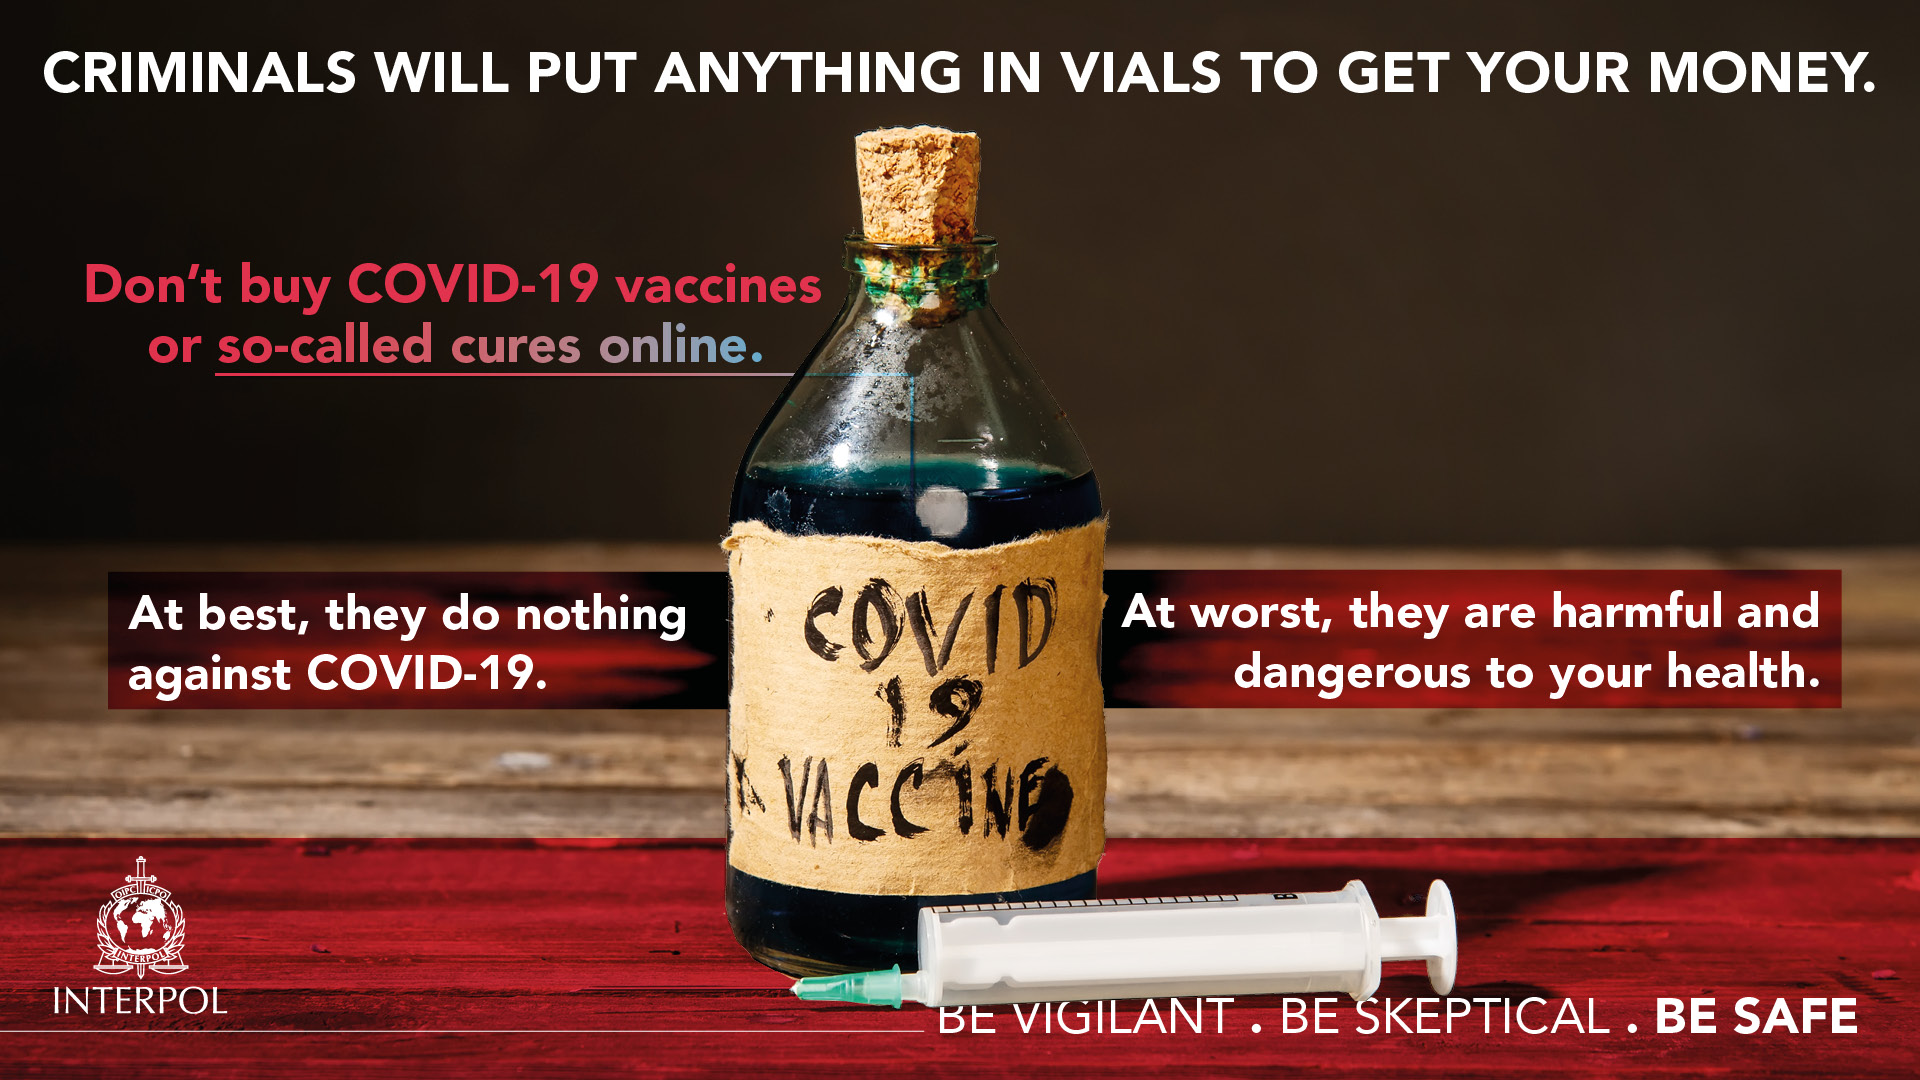 Don’t buy Covid-19 vaccines, cures online: Interpol